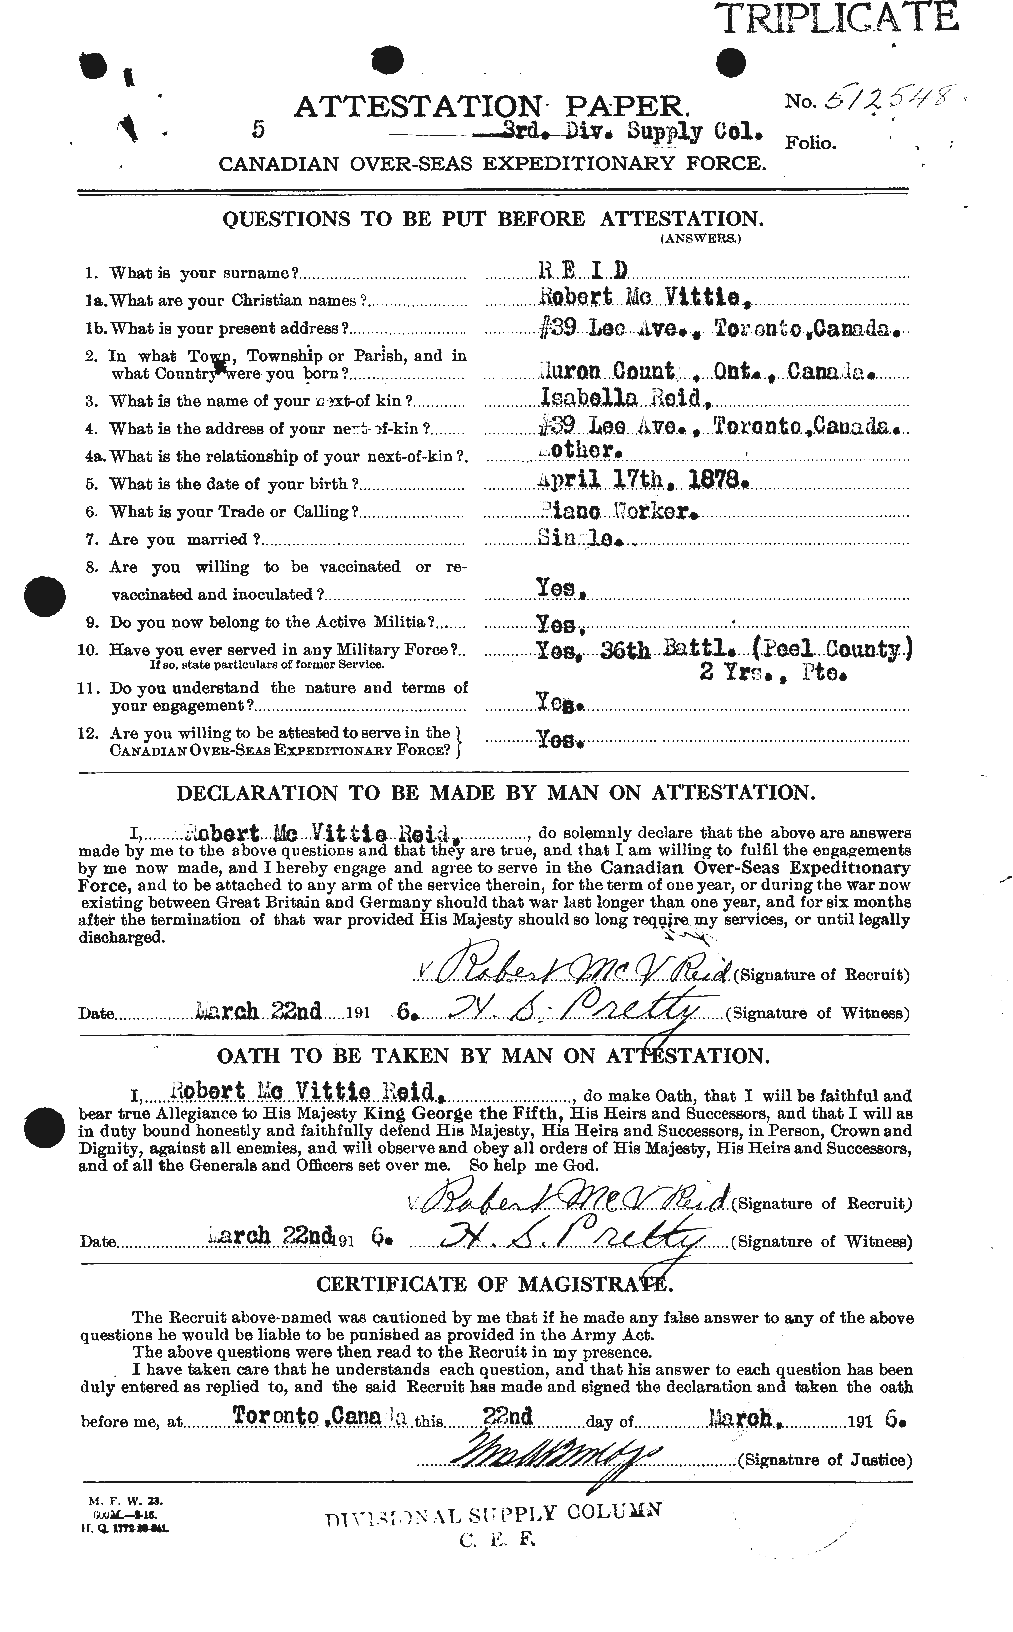 Personnel Records of the First World War - CEF 601912a